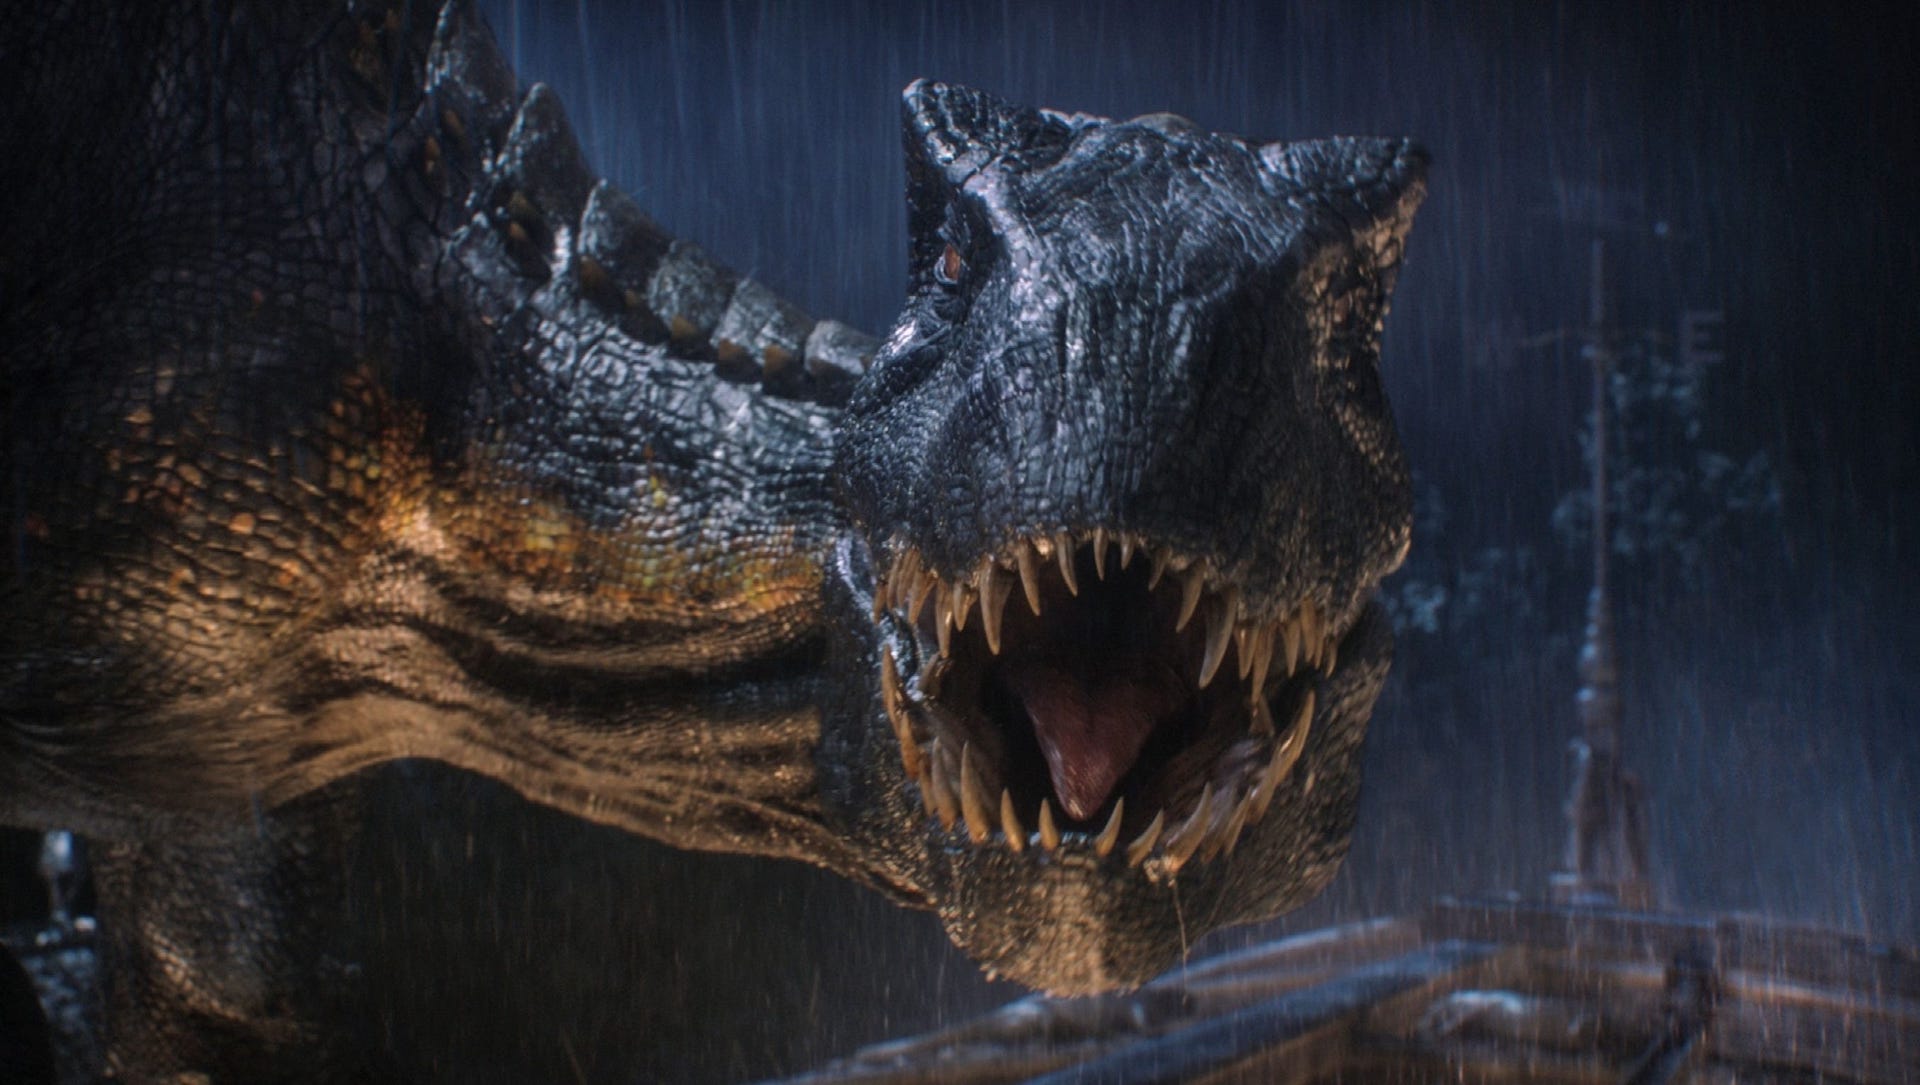 New Jurassic World: Dominion image features dinosaurs